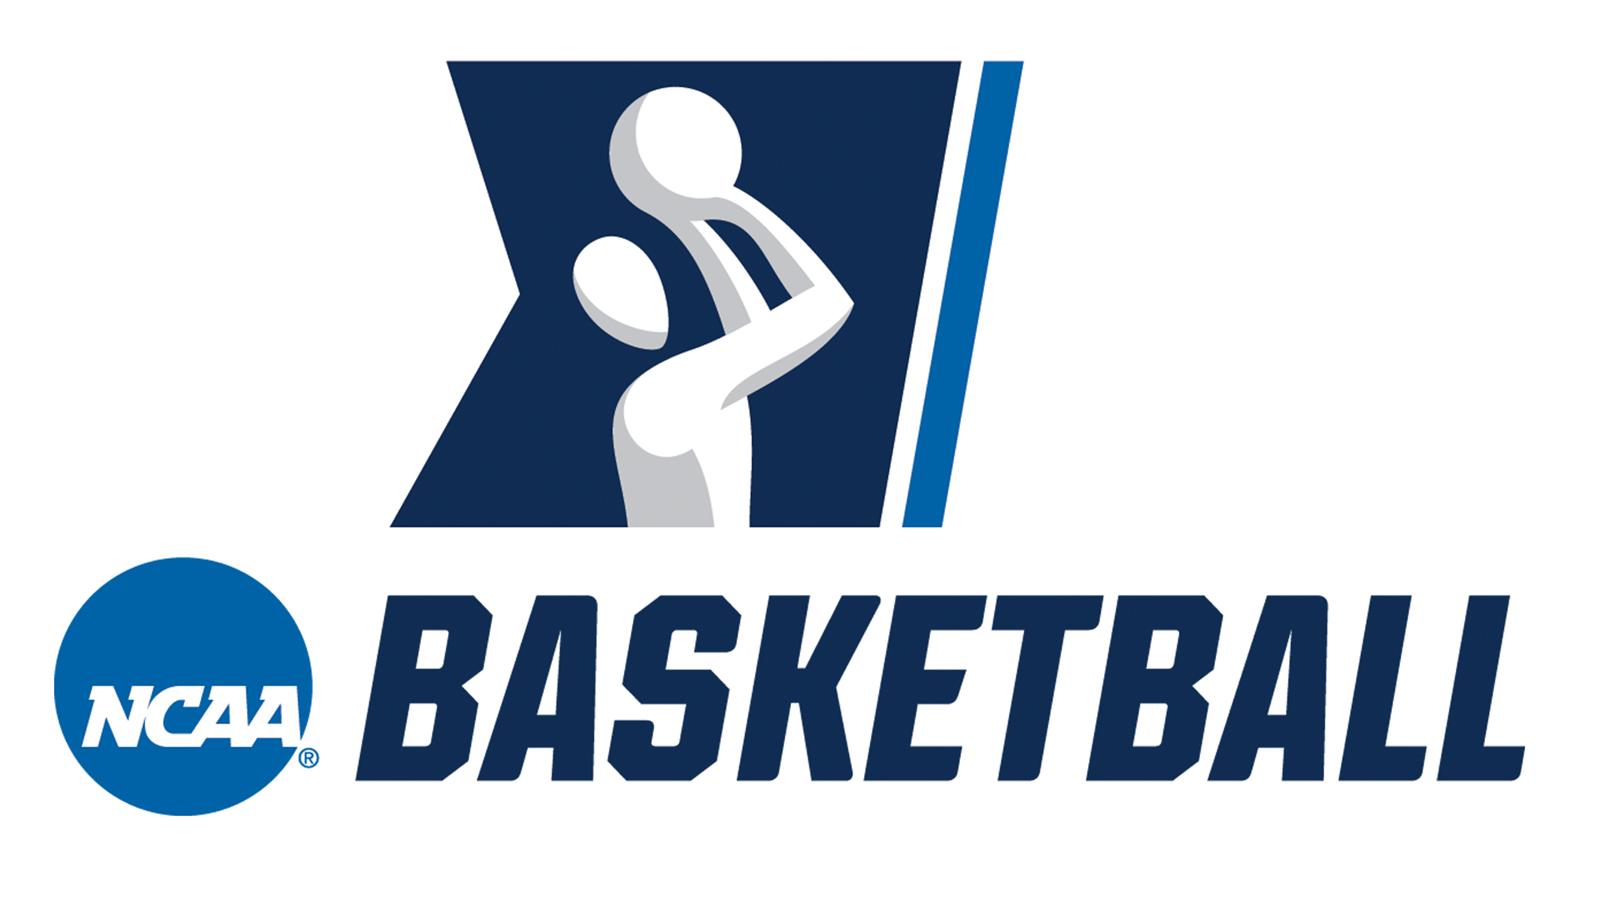 NCAA Men's Basketball Tournament: Rounds 1 & 2 - Session 2 at Amway Center